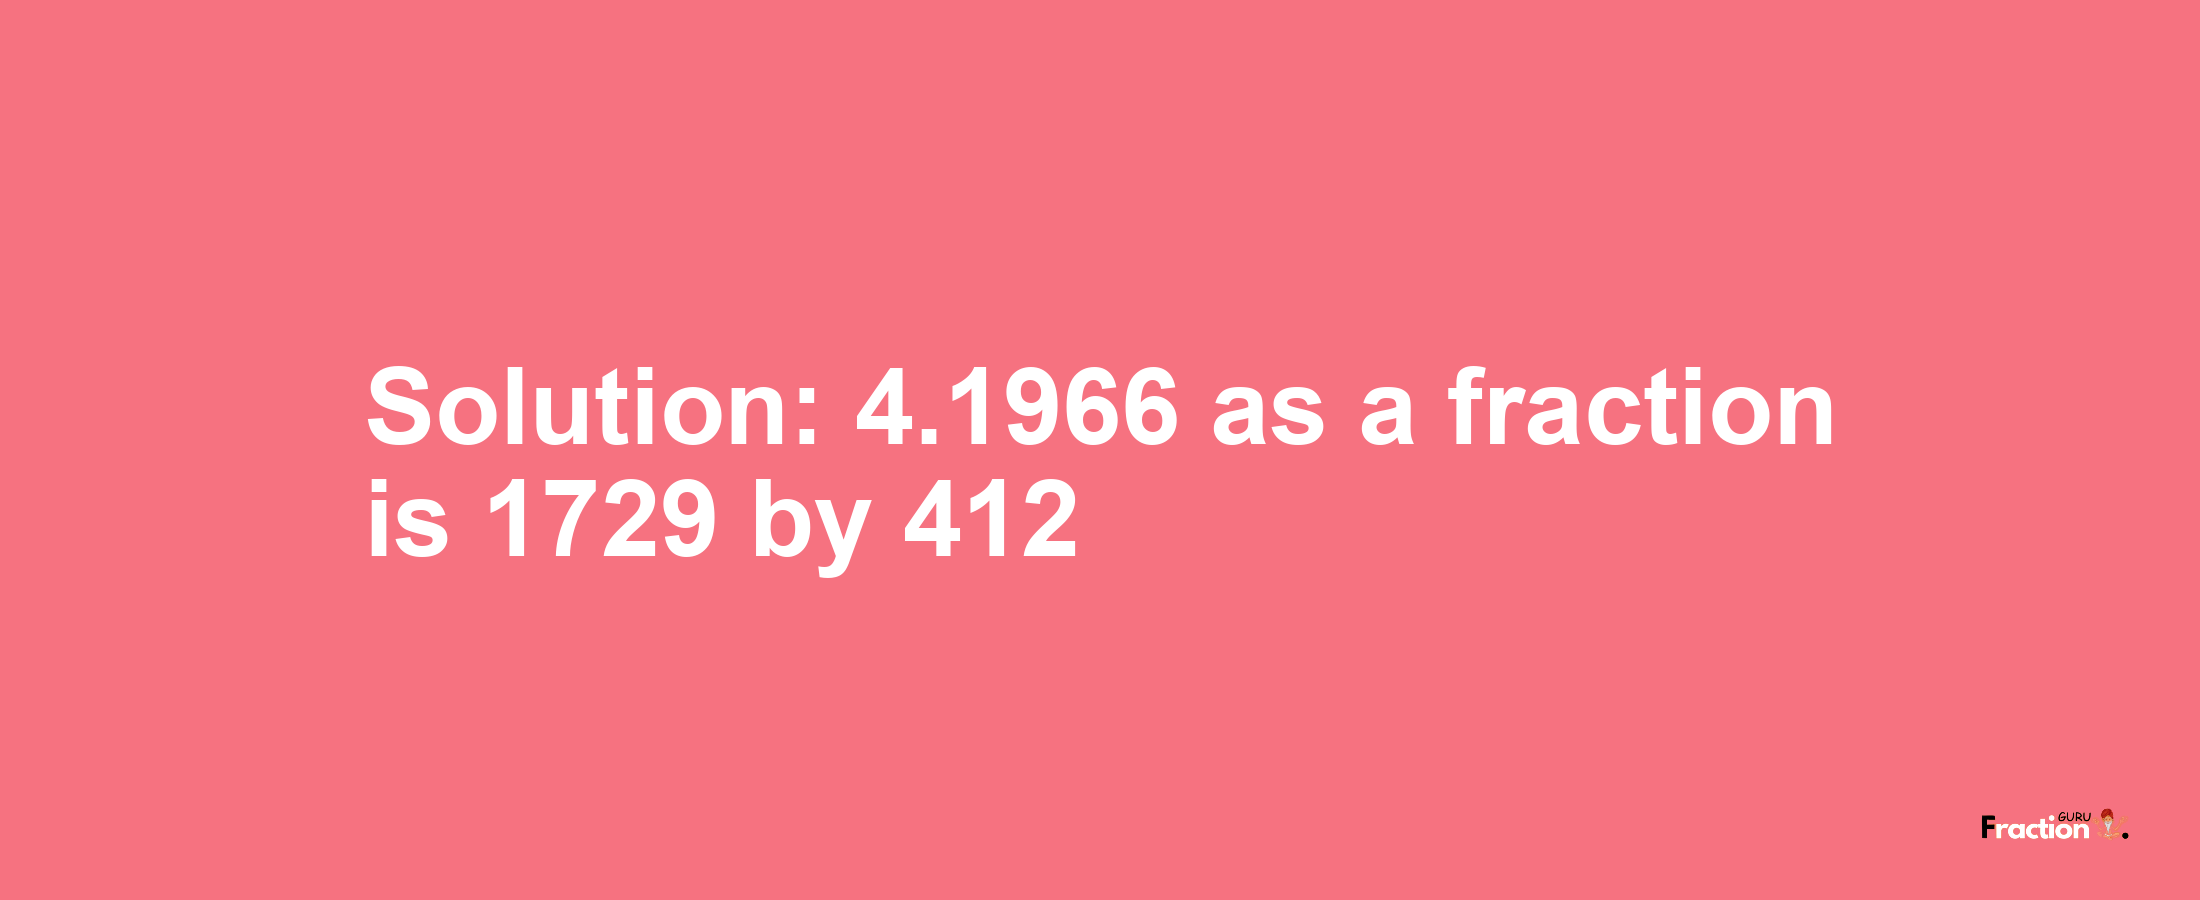 Solution:4.1966 as a fraction is 1729/412